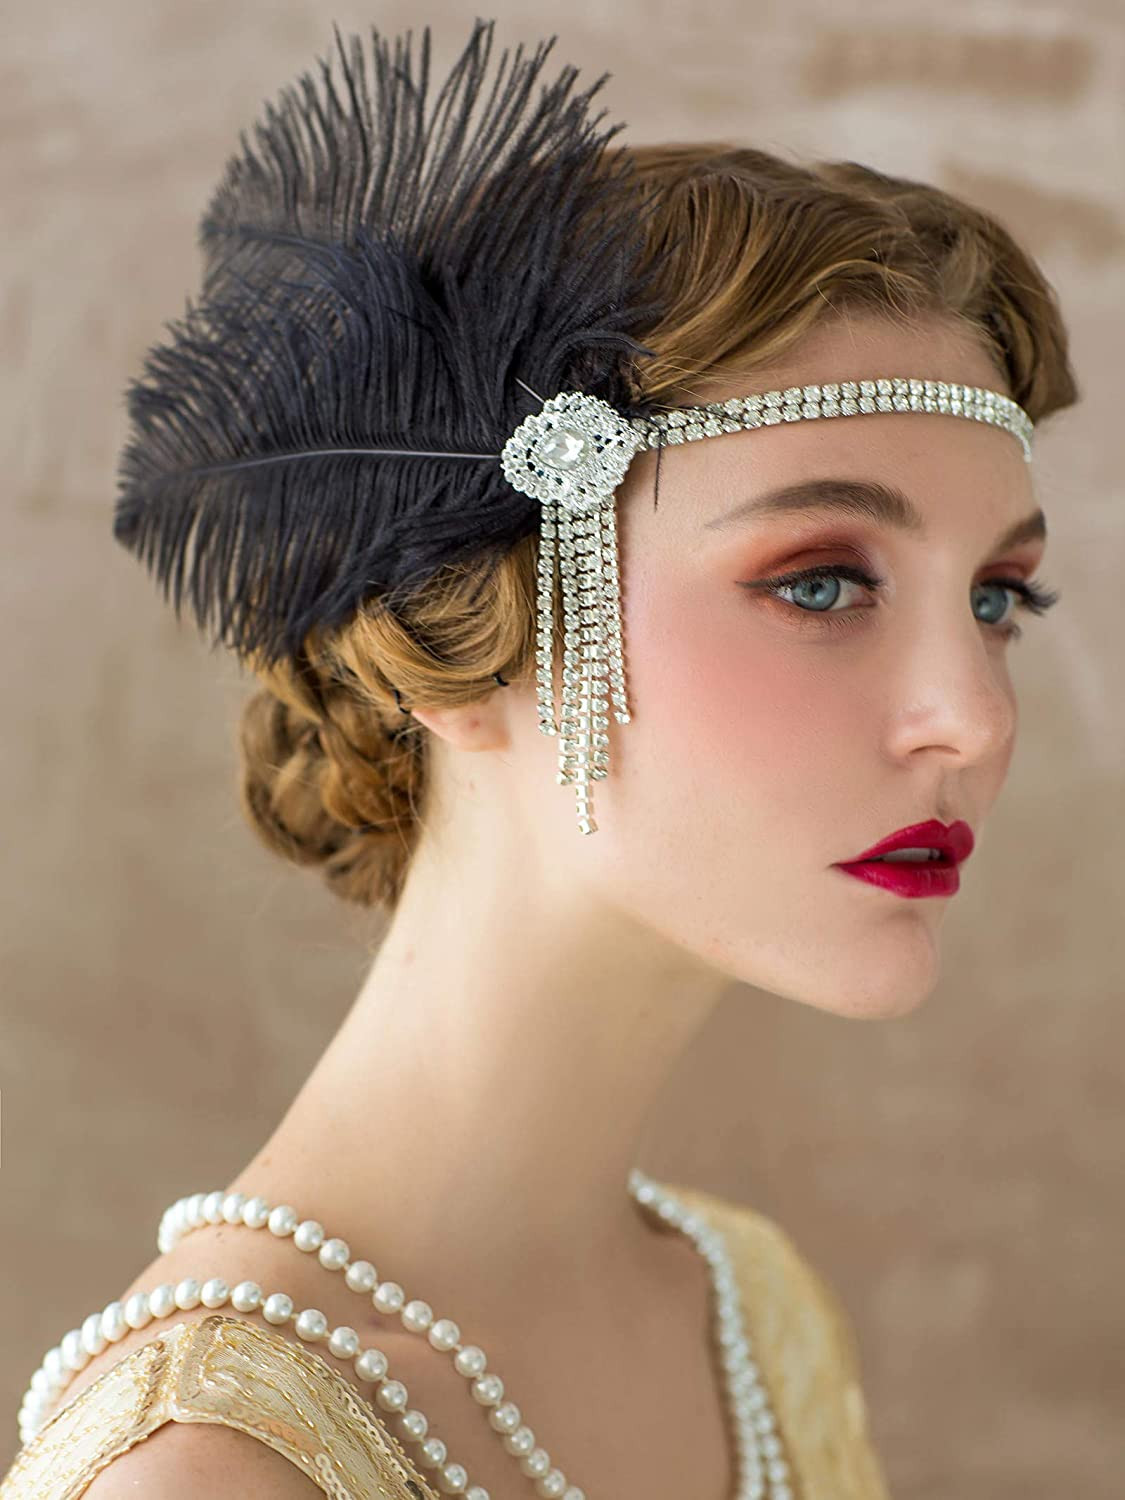 Great Gatsby Hairstyles For Long Hair Unique 1920s Hairstyles History Long Hair To Bobbed Hair Of Great Gatsby Hairstyles For Long Hair 